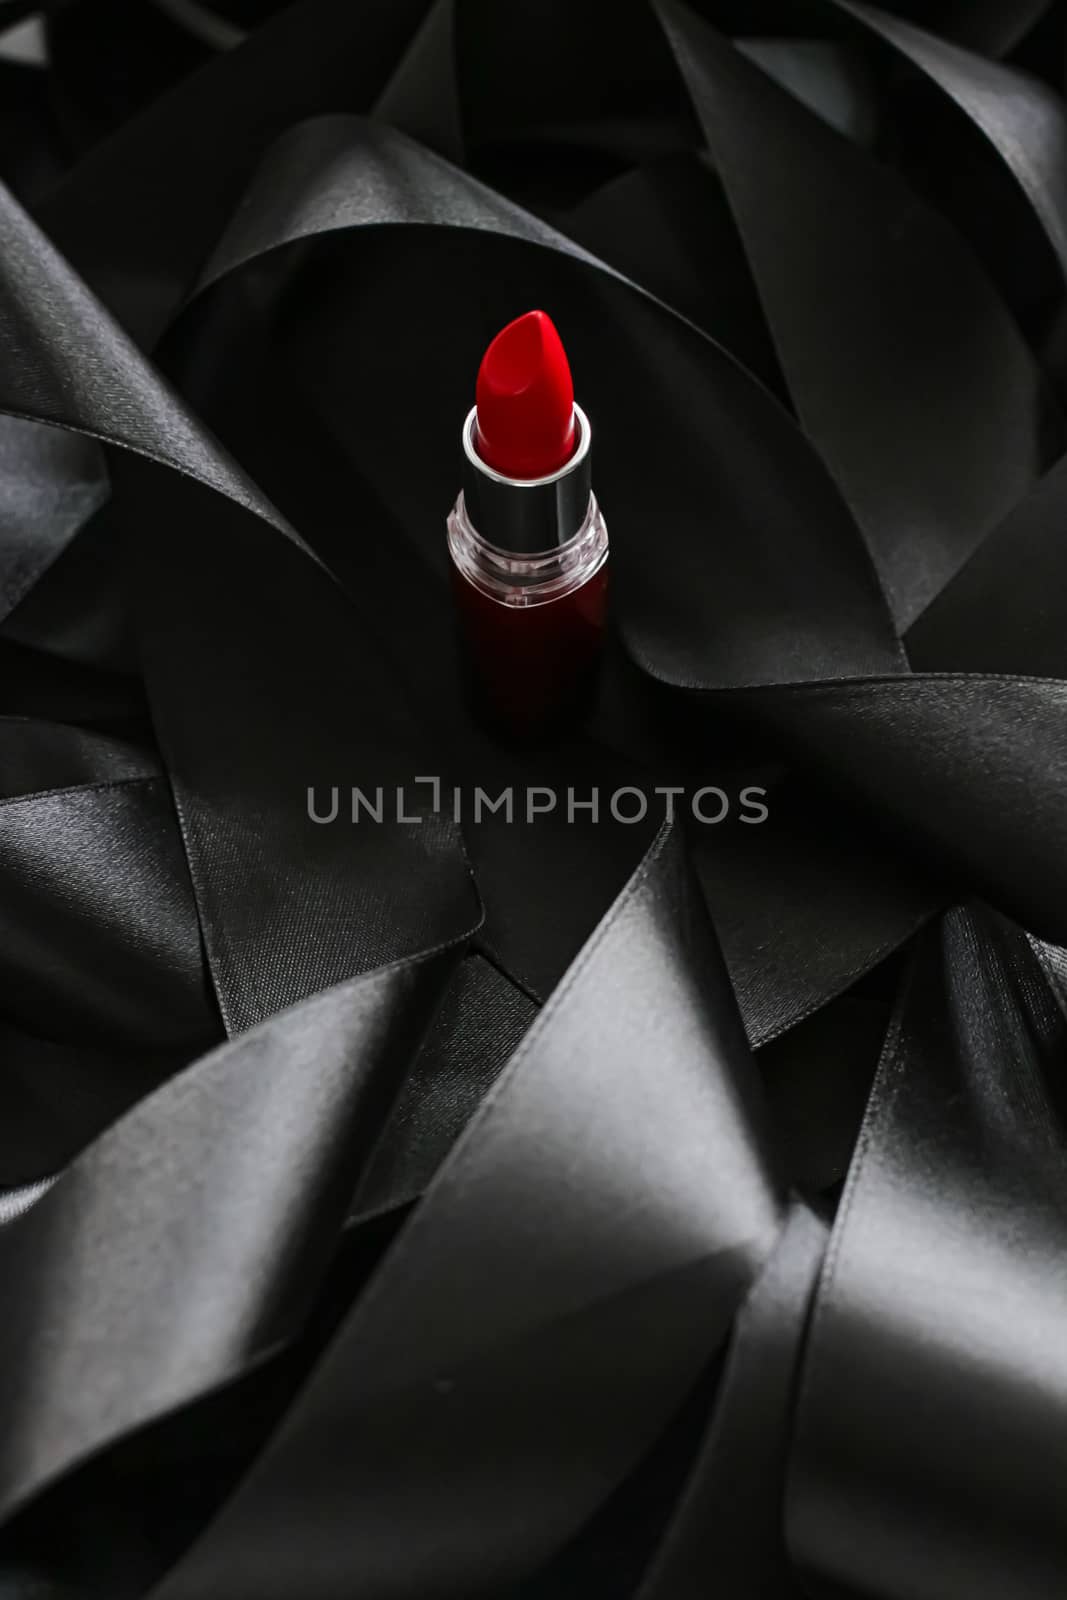 Red lipstick on black silk background, luxury make-up and beauty cosmetics